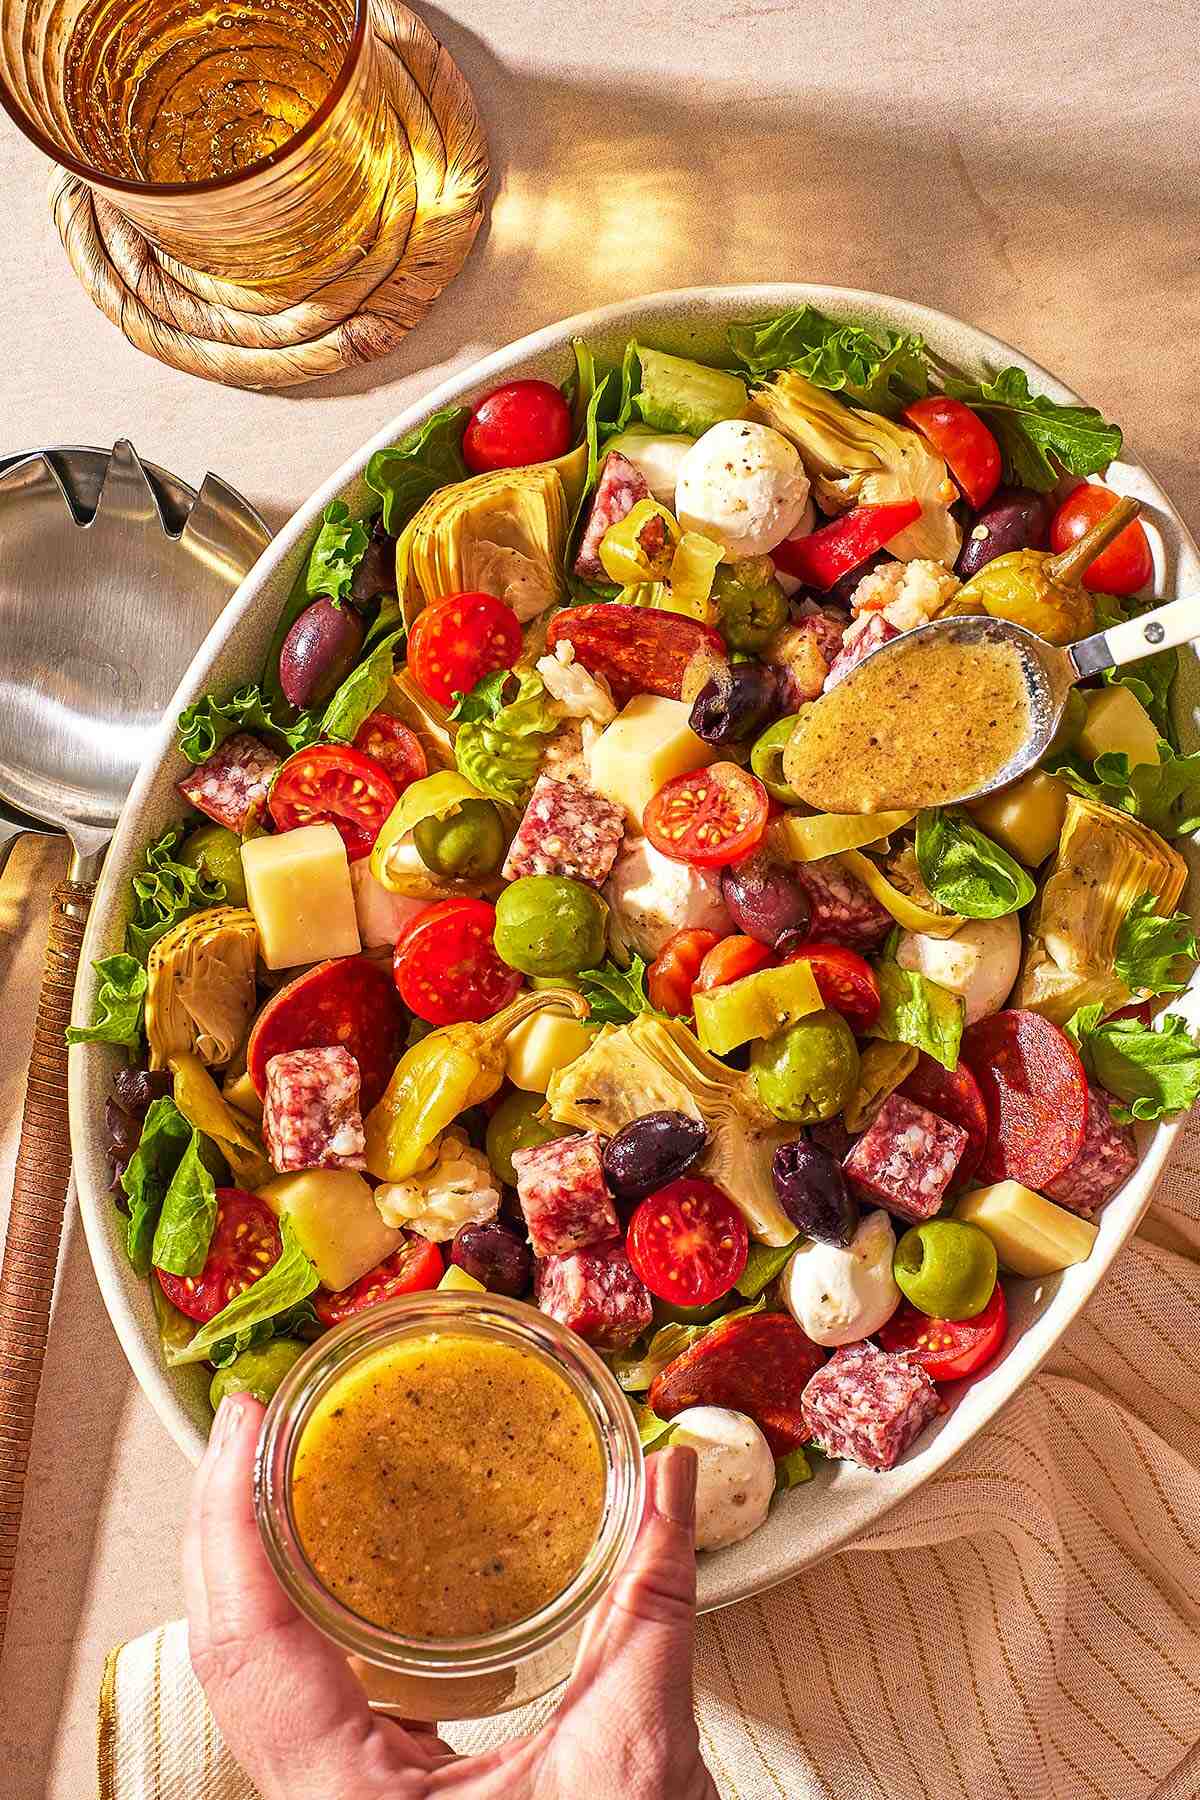 an overhead photo of dijon vinaigrette being spooned from a jar onto the antipasto salad, next to a glass of water and serving utensils.